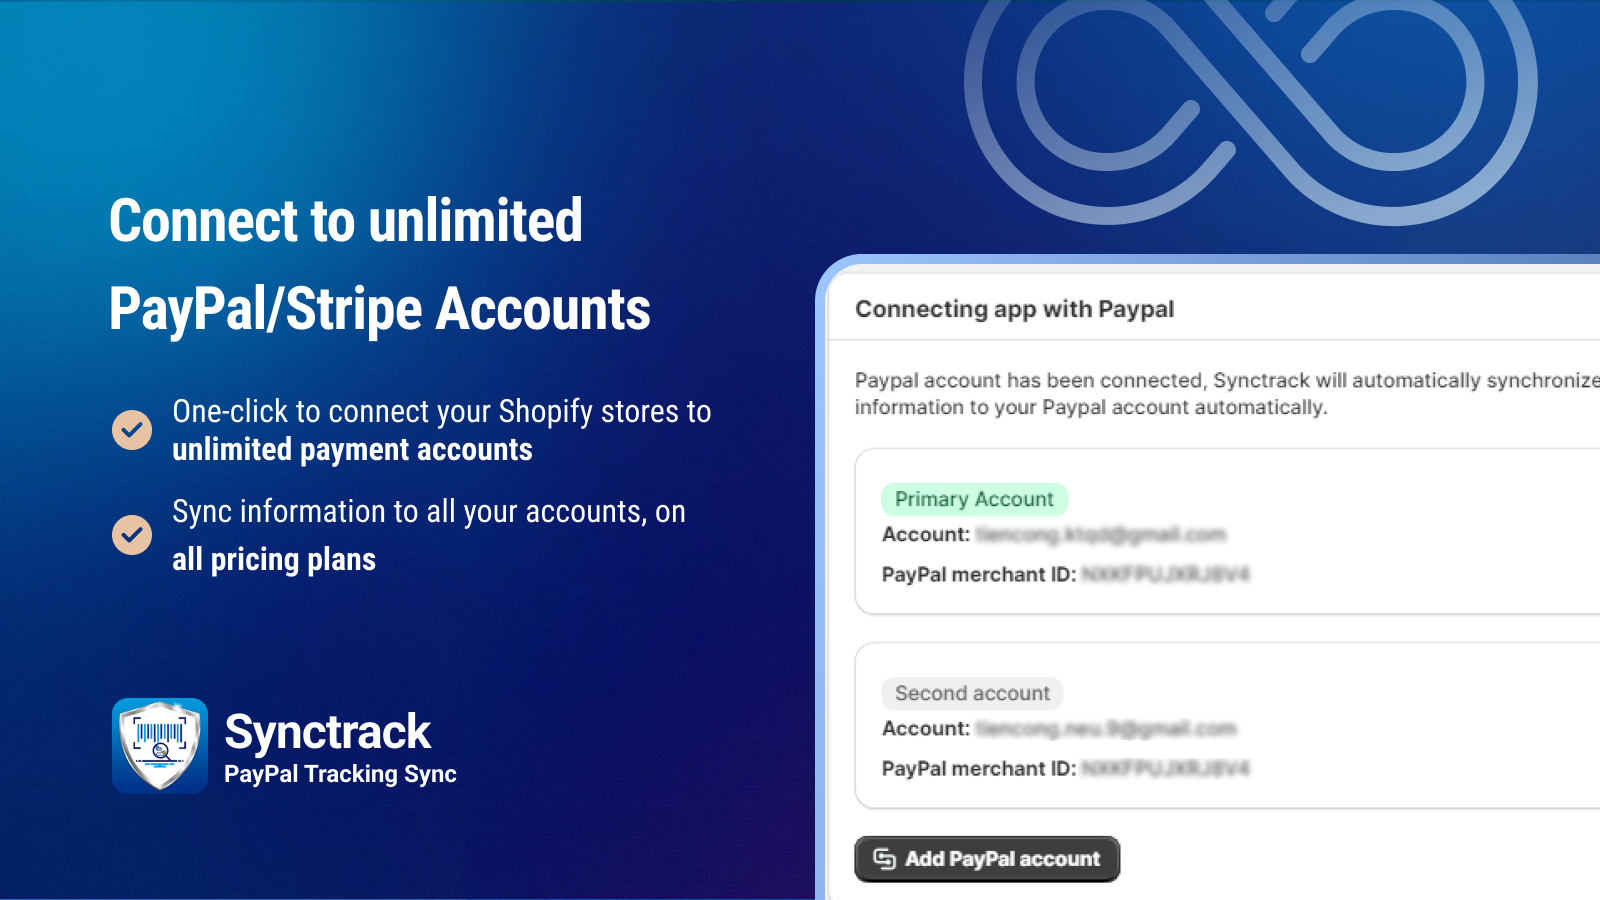 Synctrack supports unlimited PayPal and Stripe accounts